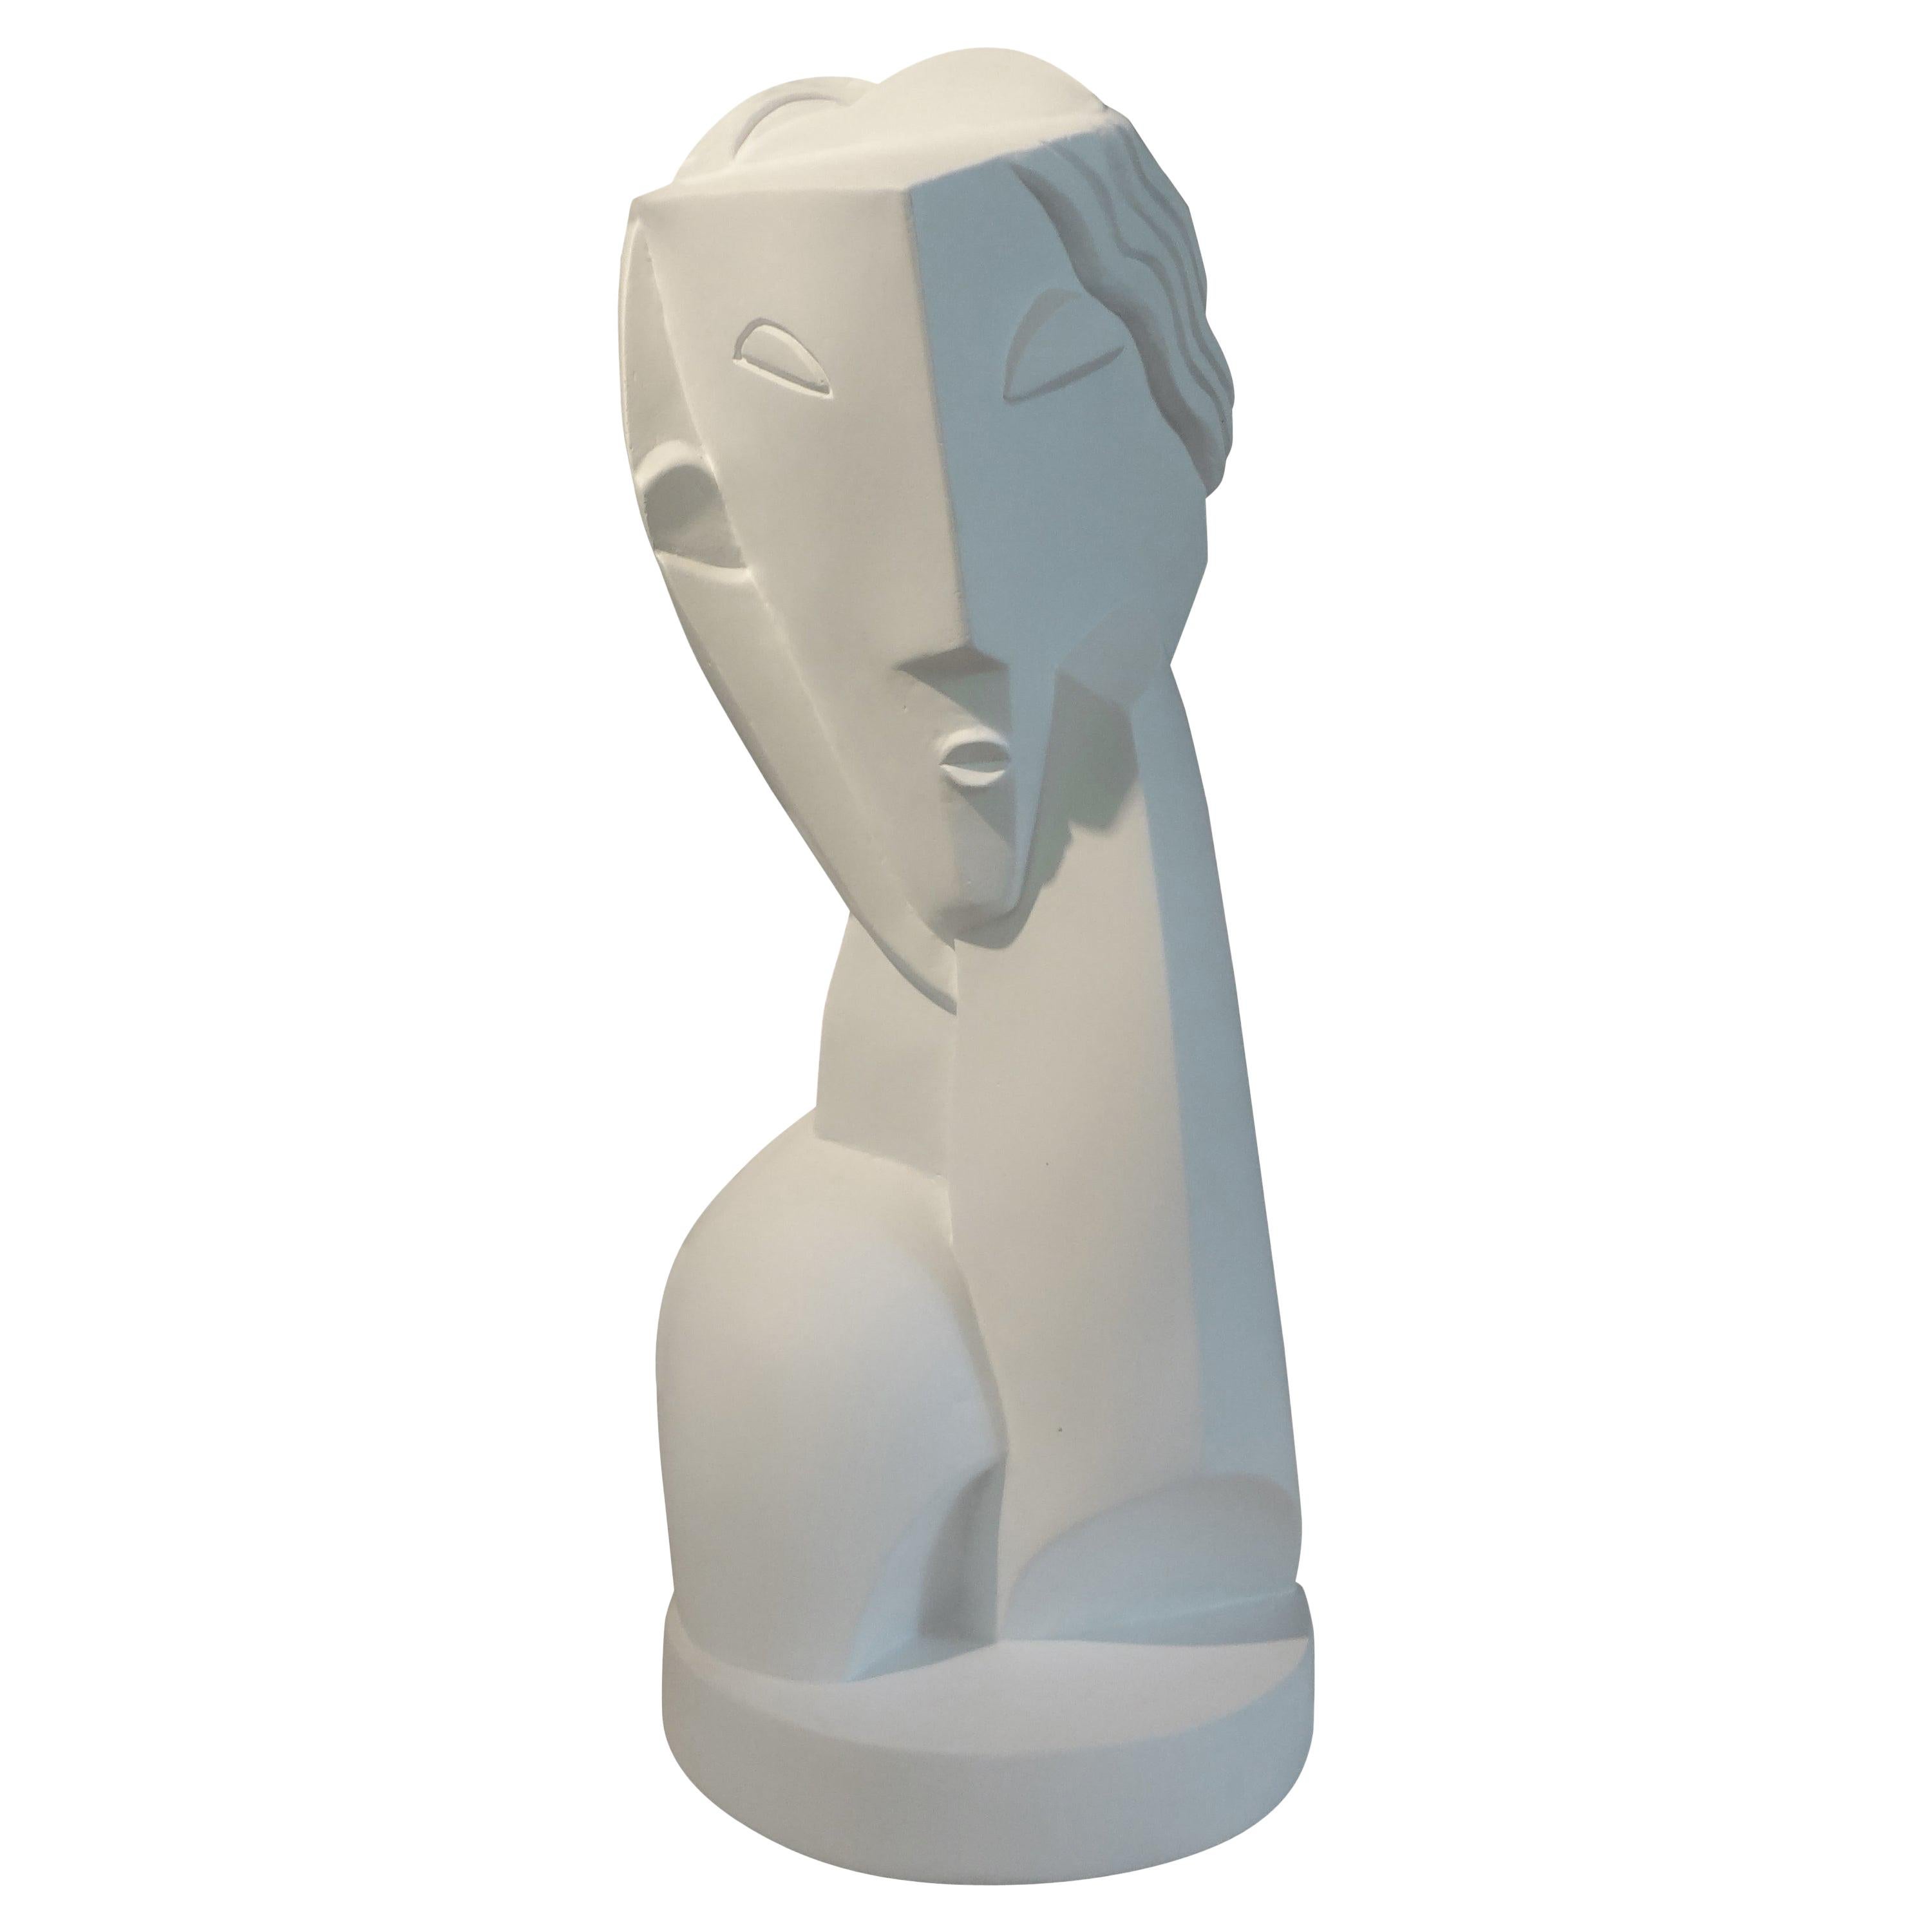 Art Deco Style Abstract Plaster Bust Sculpture